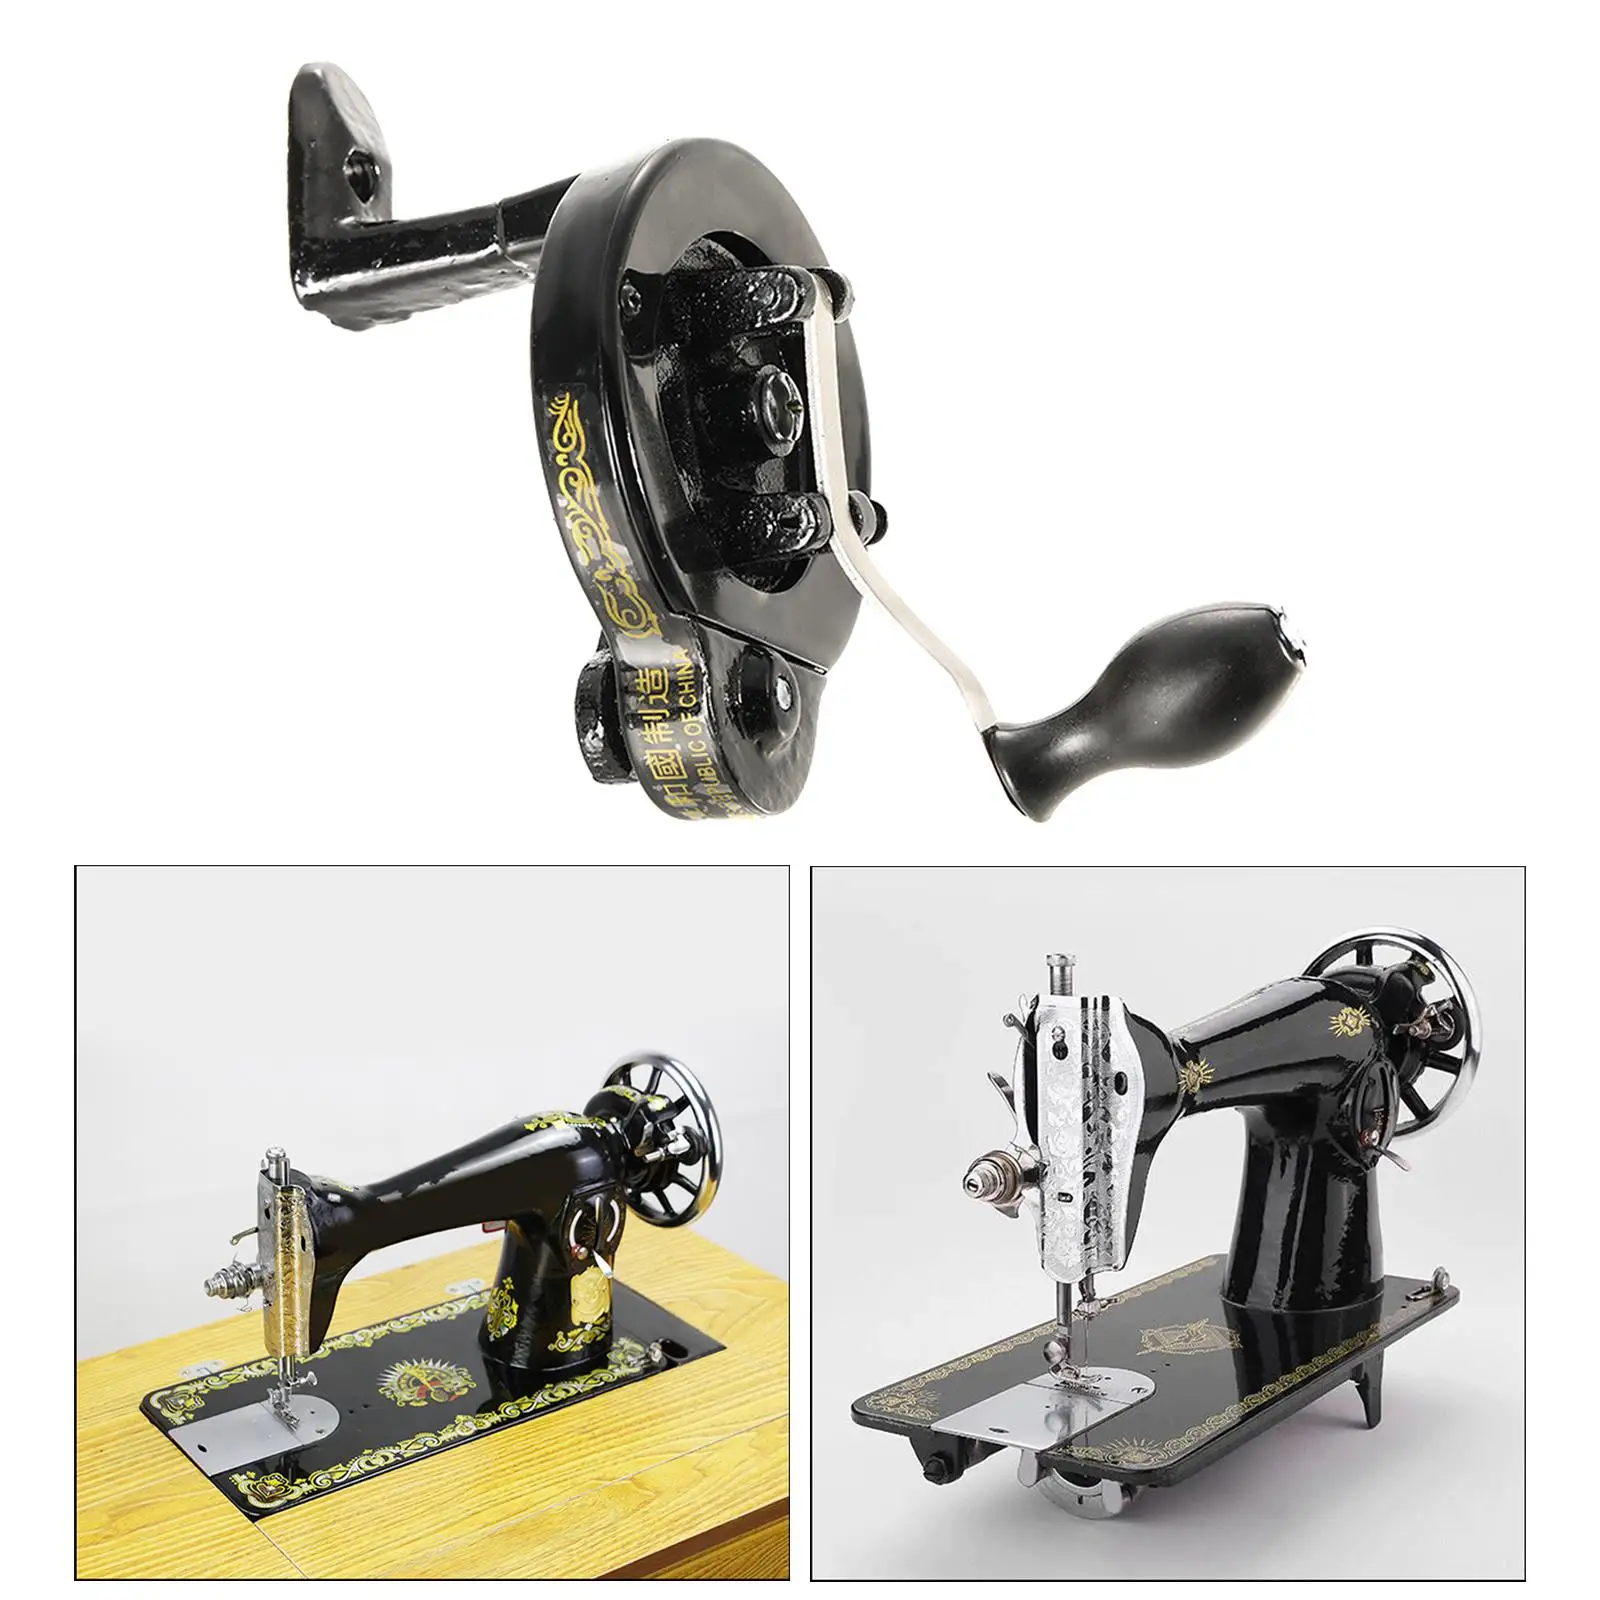 Sewing Machine Hand Crank Sew Accessories Handcrank for Old Sewing Machines